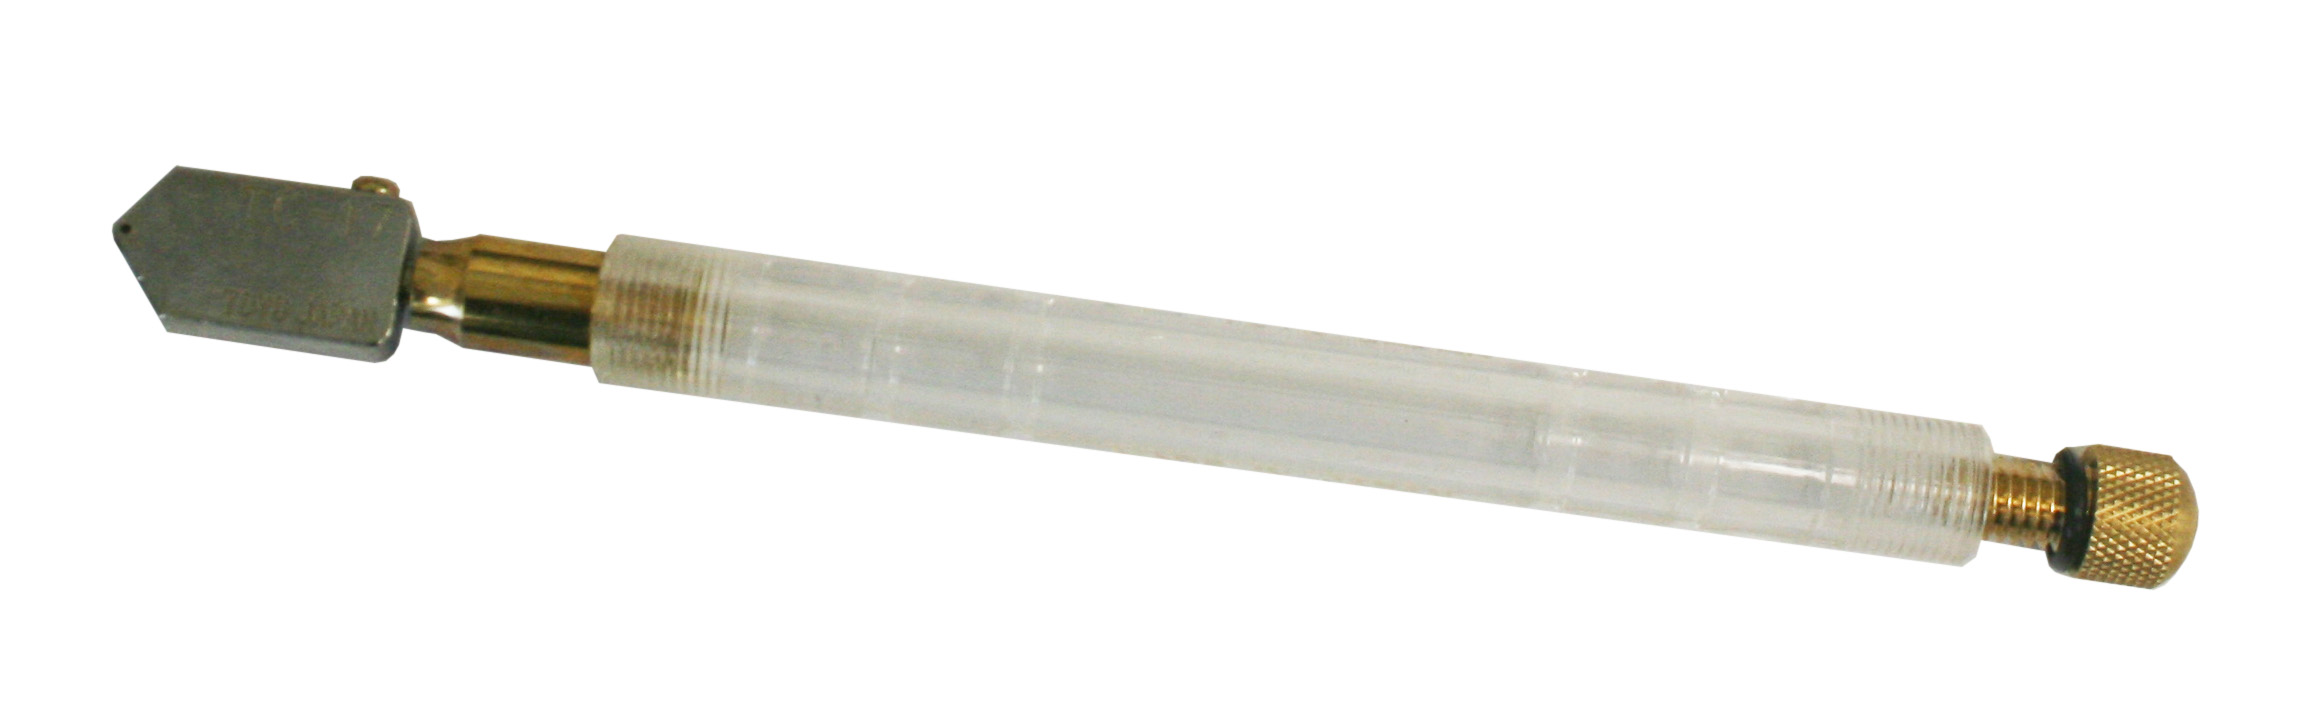 Plastic Glass Cutter By Wessex Pictures